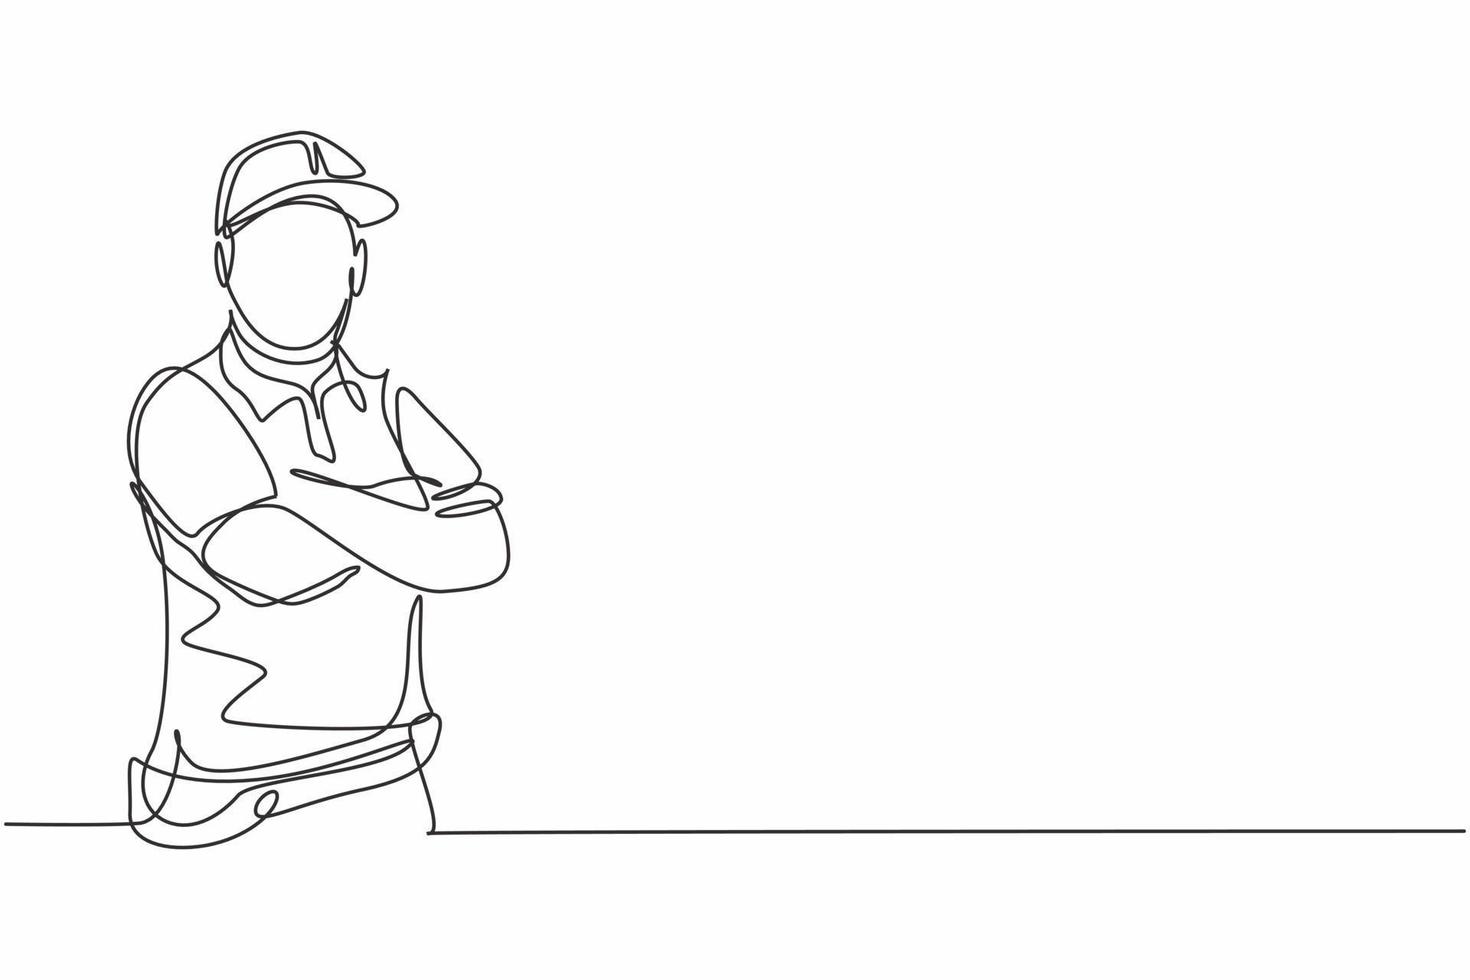 Continuous one line drawing of young delivery man with uniform posing cross his hands on chest. Professional job profession minimalist concept. Single line draw design vector graphic illustration